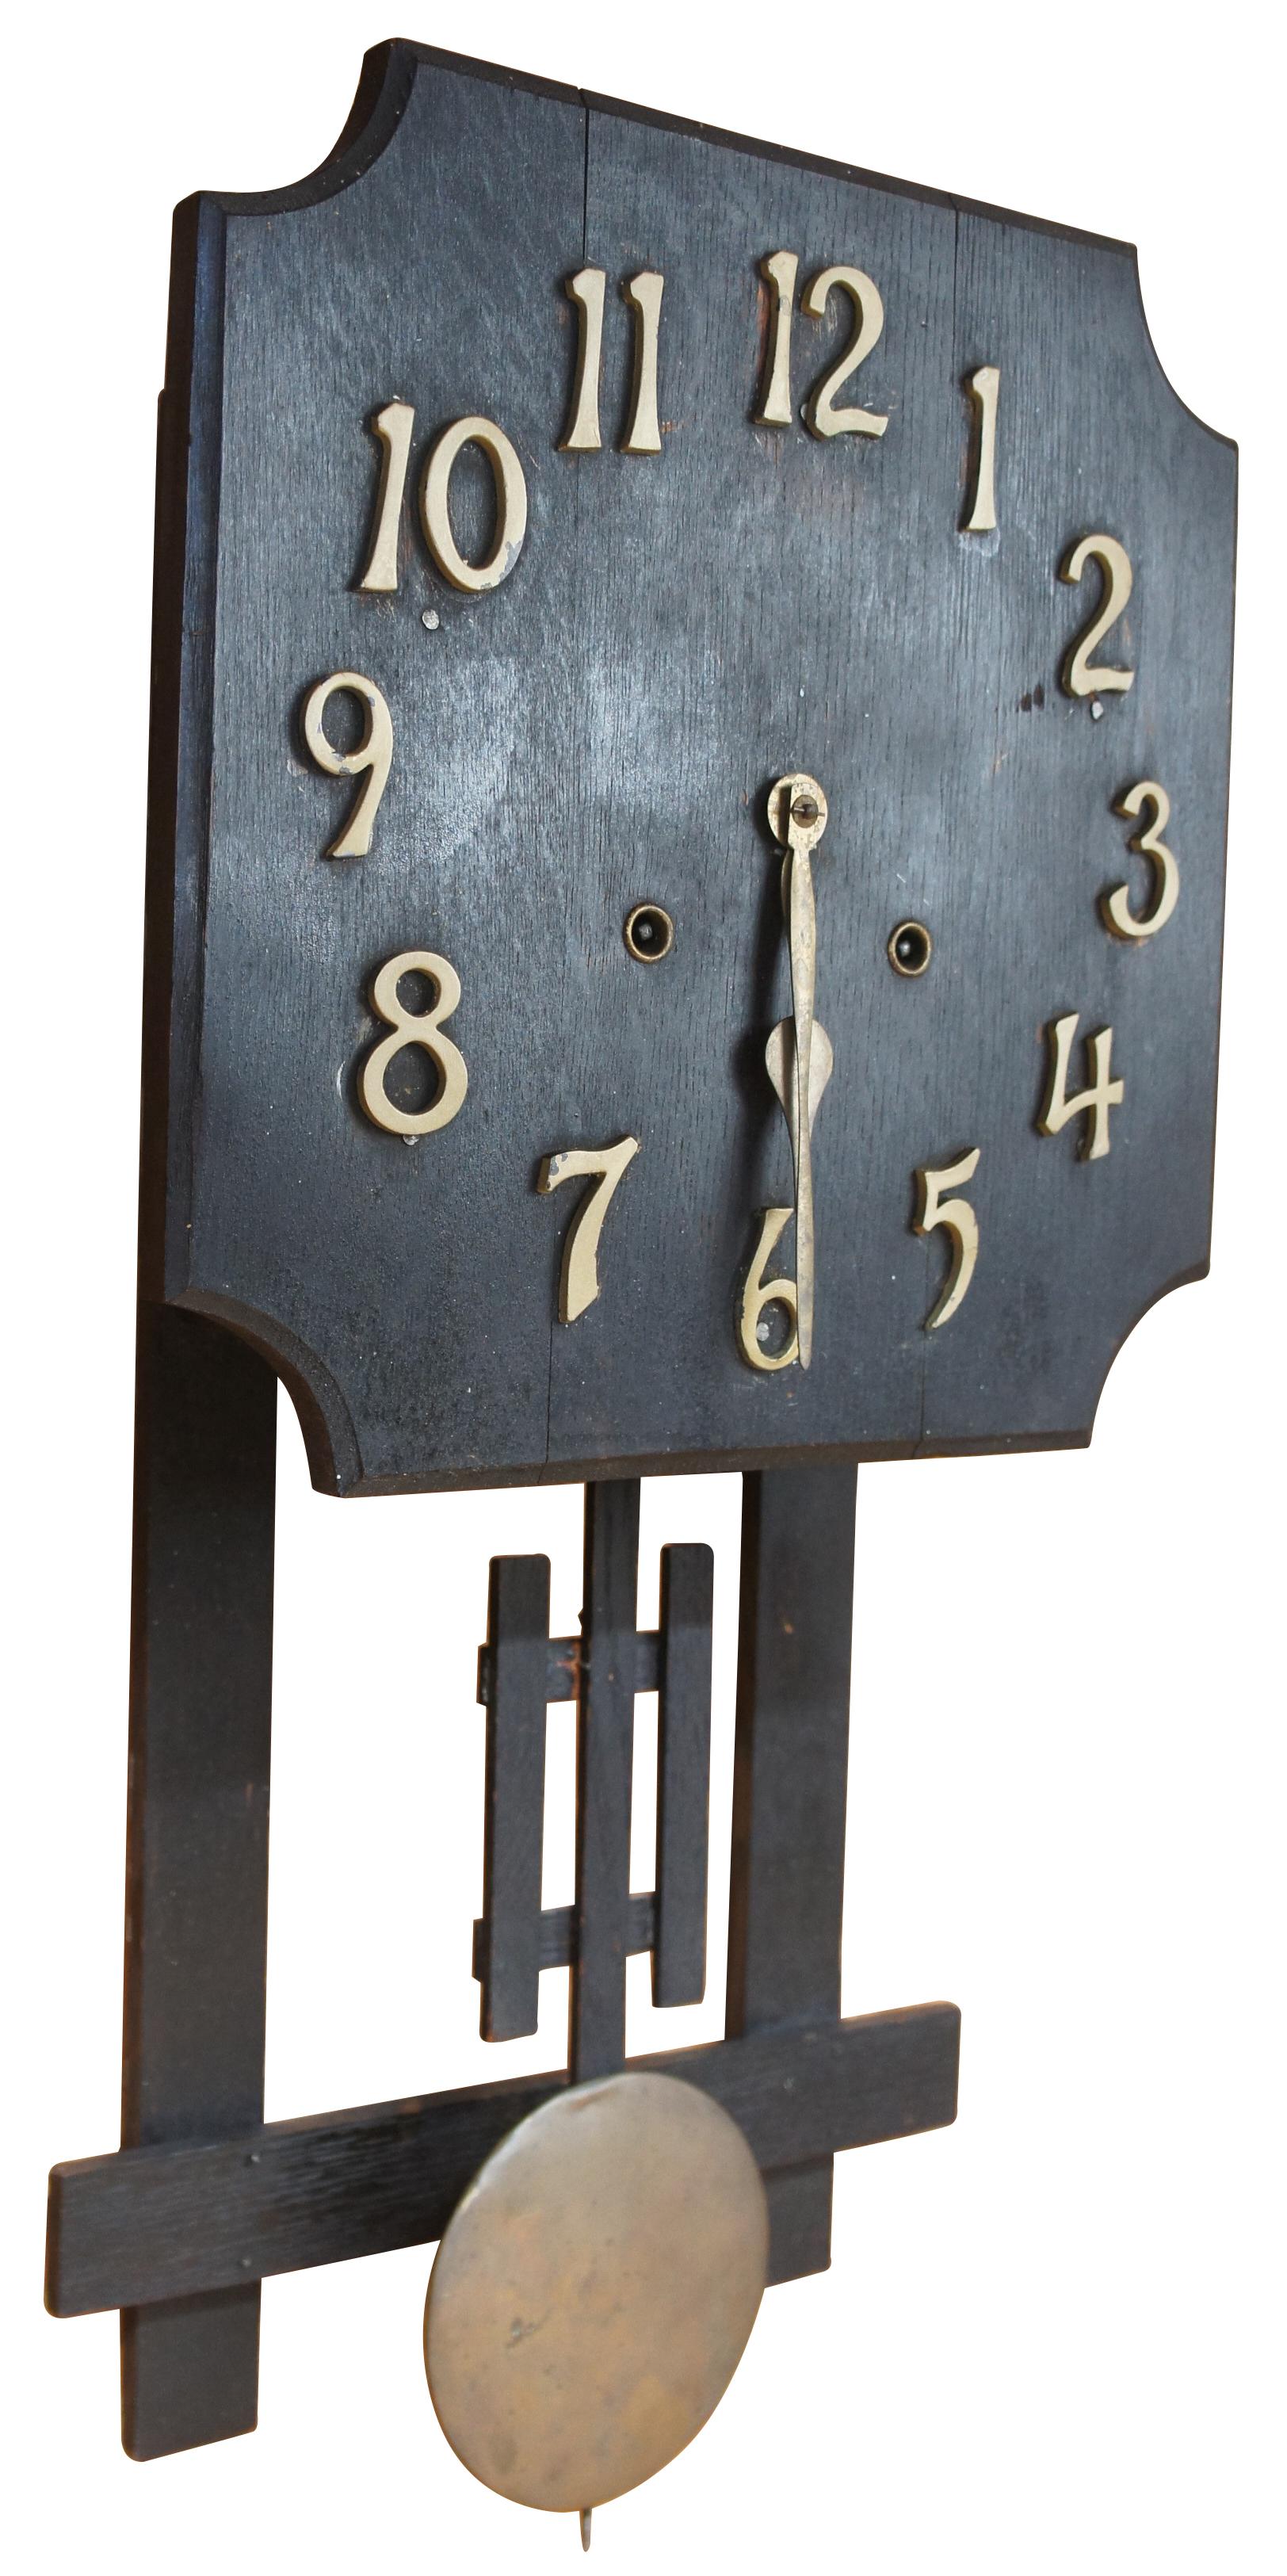 National clock co oak regulator clock. Made from oak with a black stain.